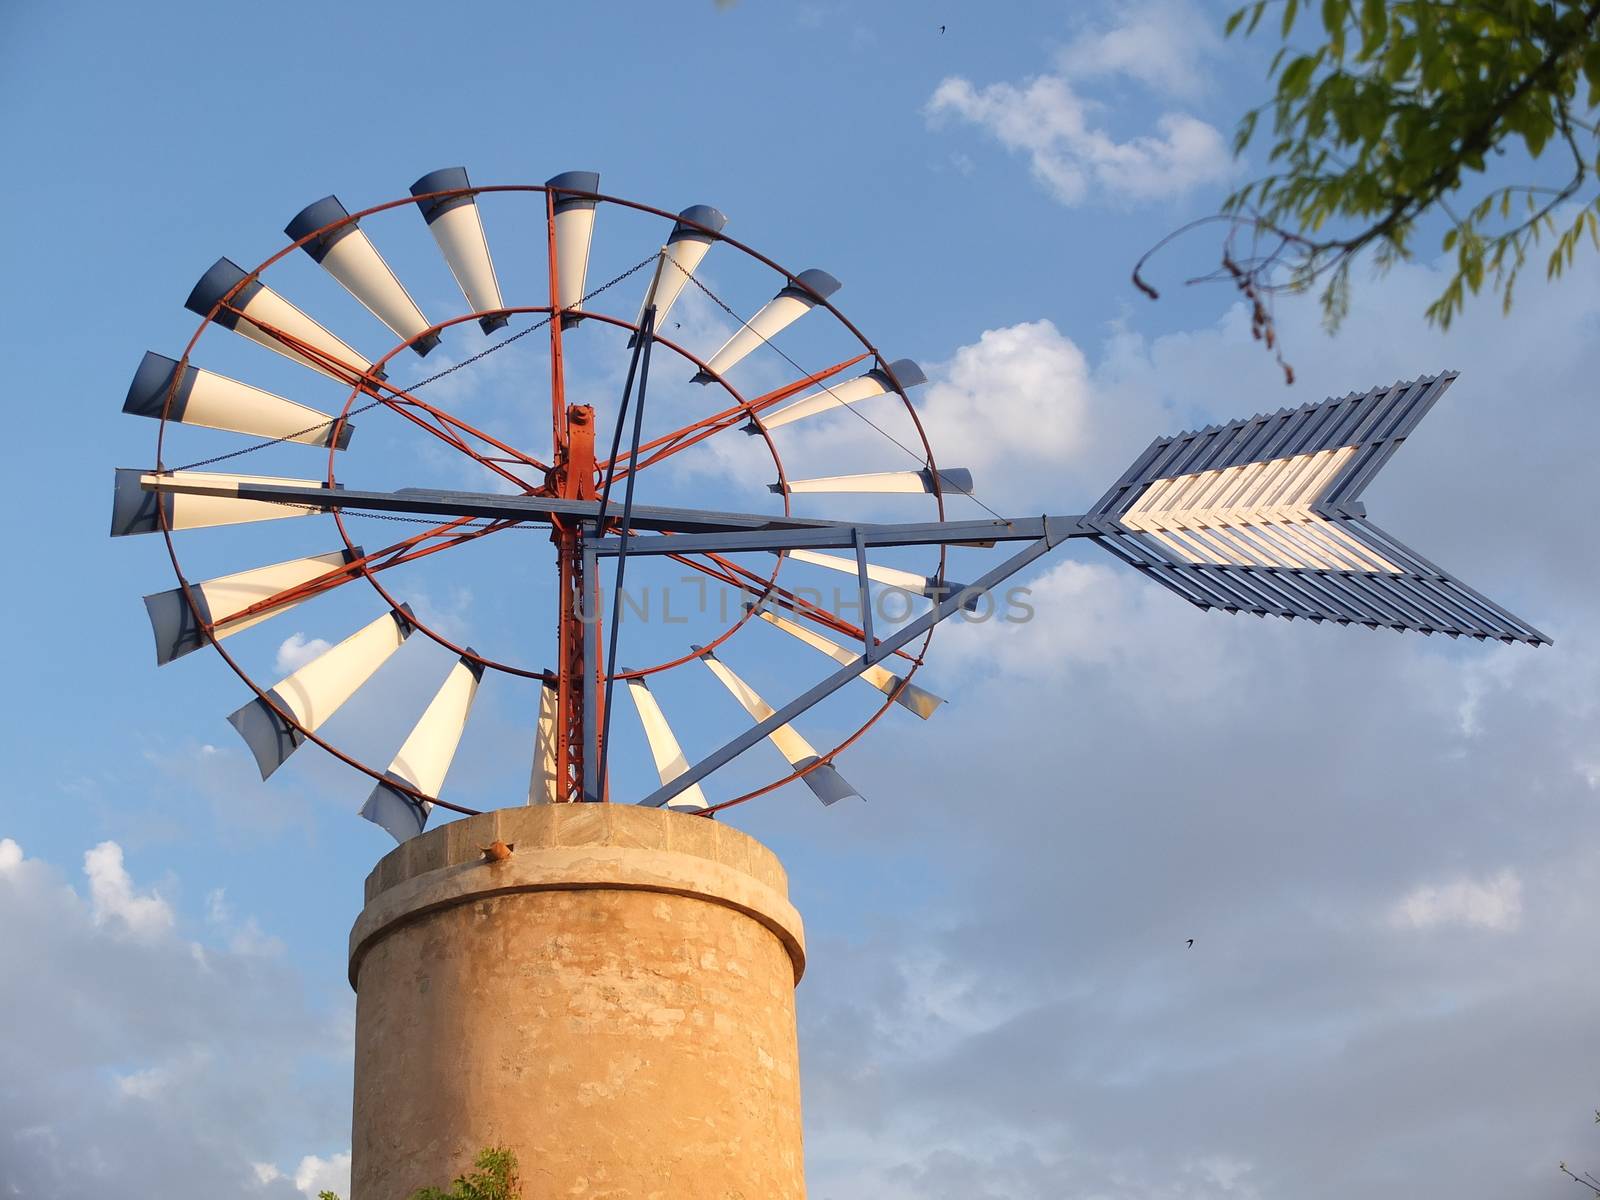 One of  theTypical windmill in the island of Majorca, Spain.